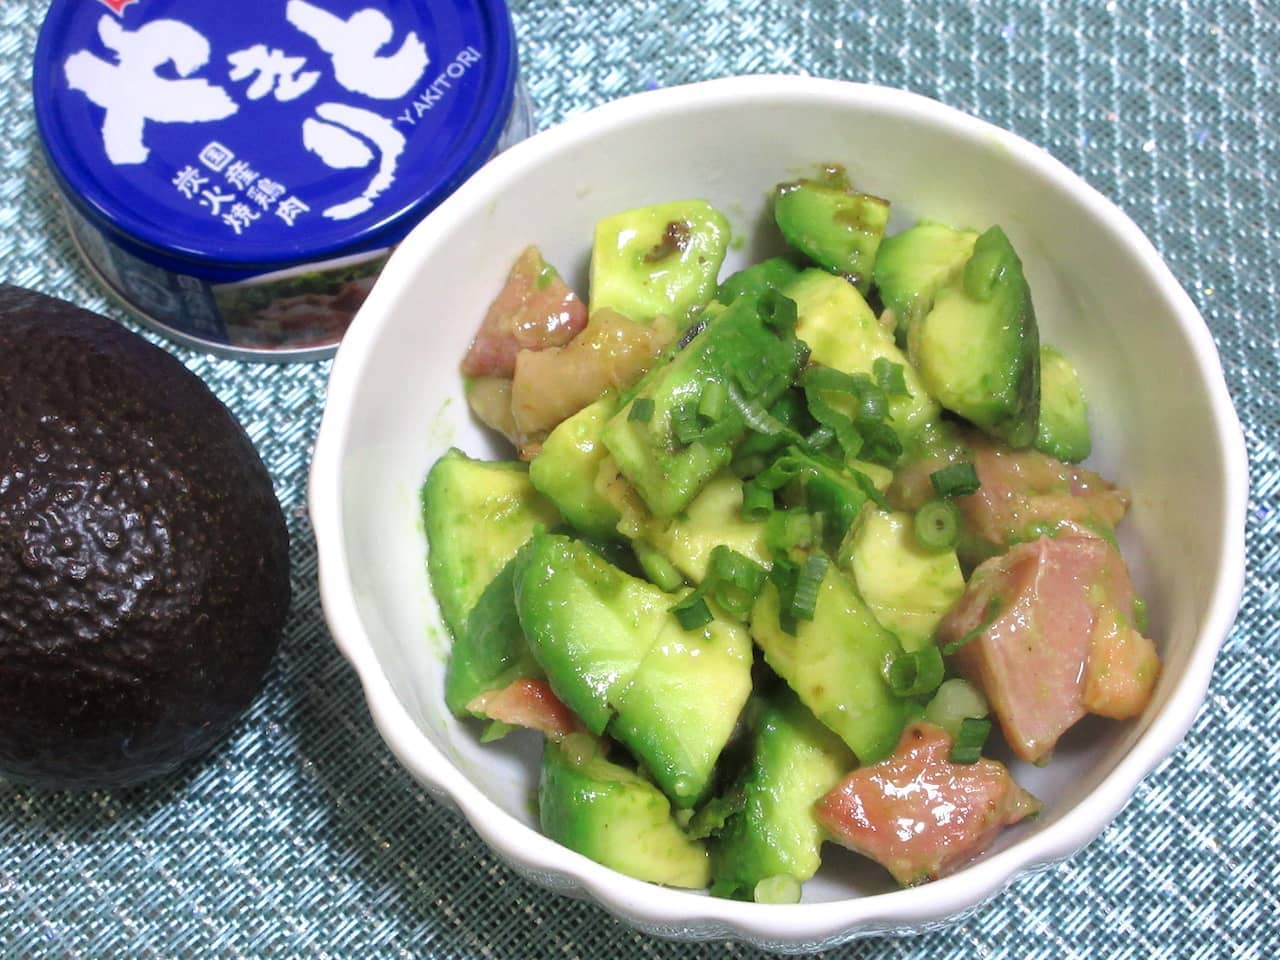 Simple recipe: "Stir-fried canned grilled chicken with avocado.